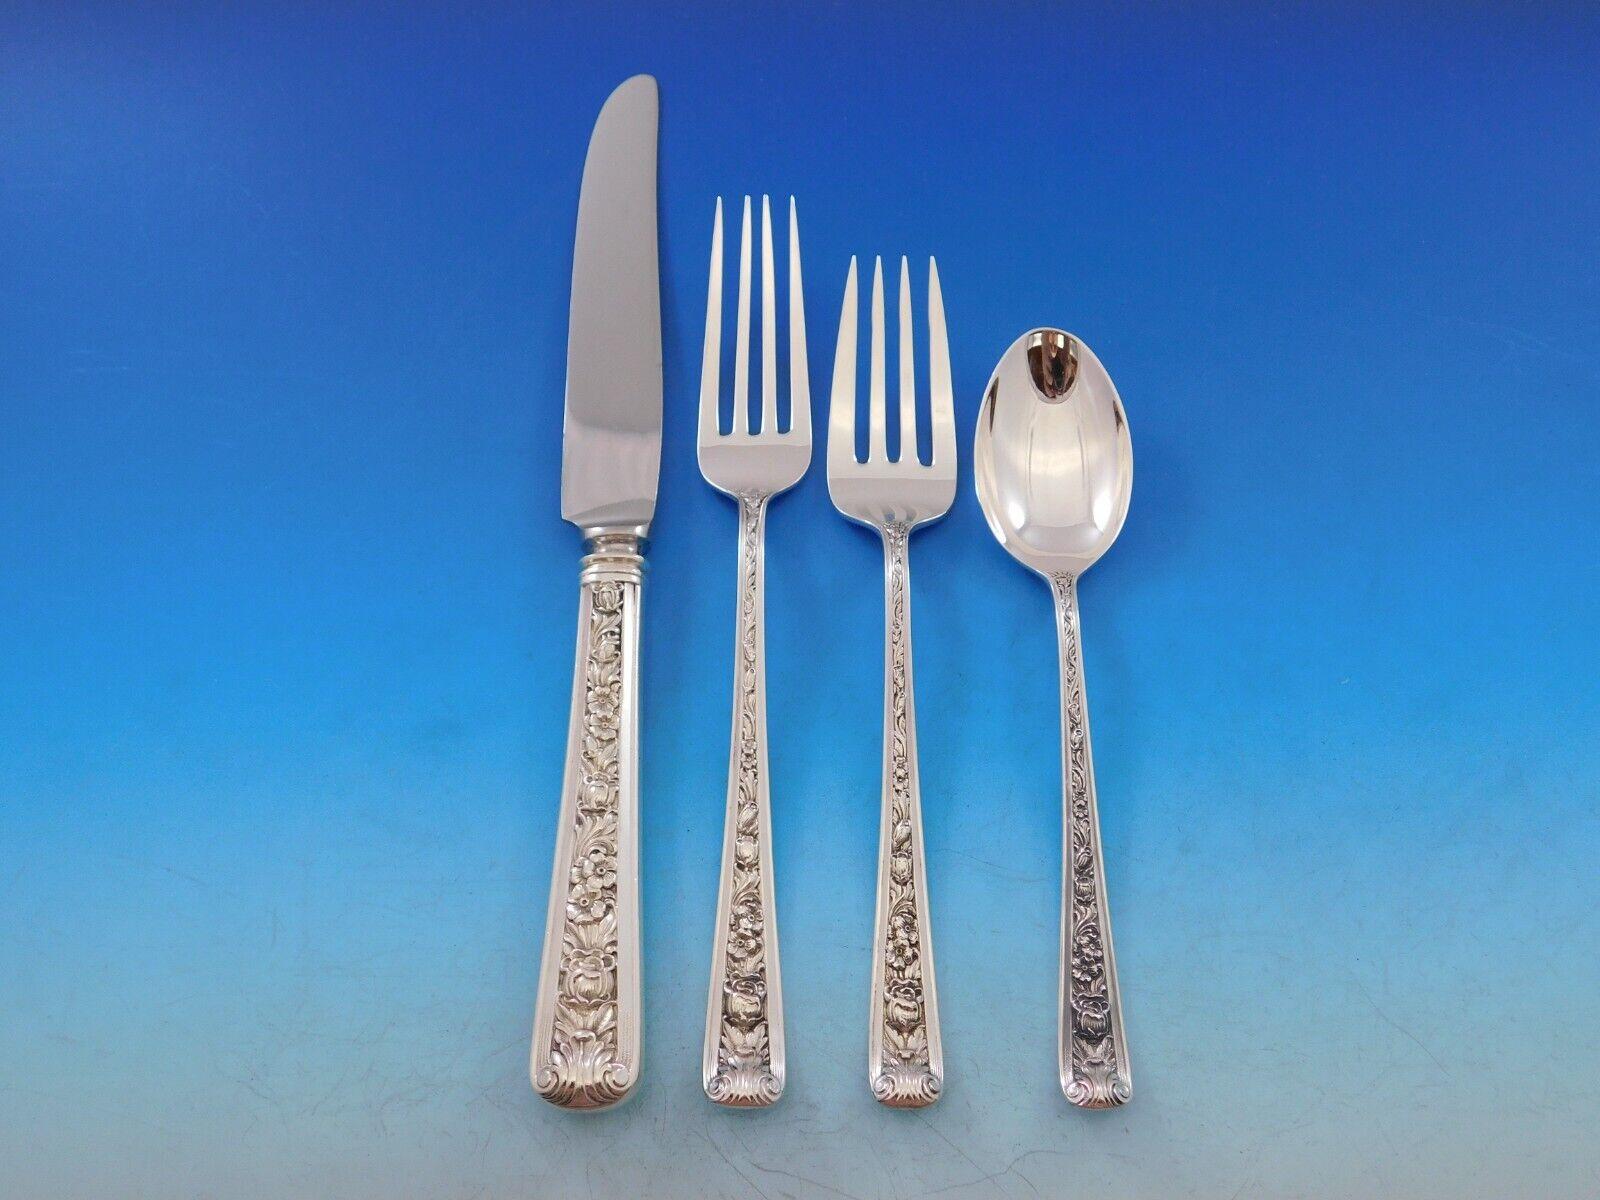 Exquisite windsor rose by Watson Sterling Silver flatware set, 46 pieces. This set includes:

8 knives, 9 1/4